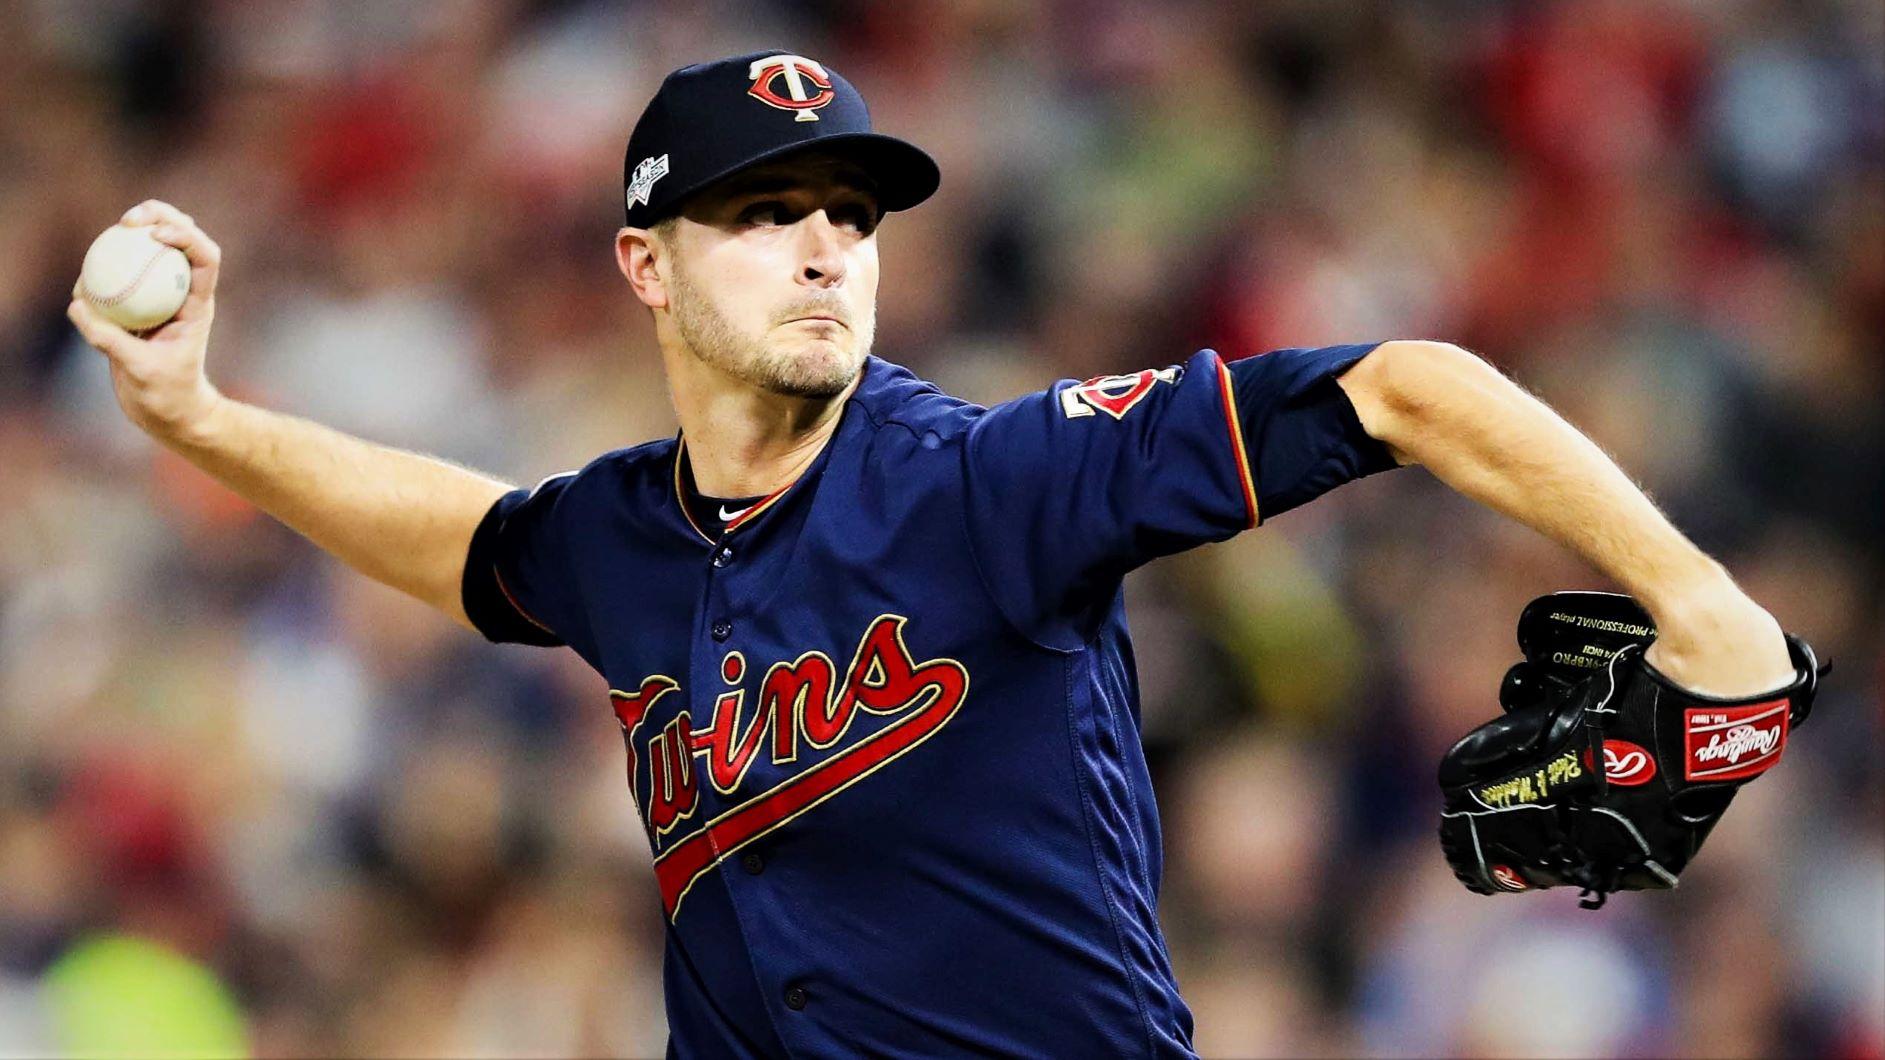 Oct 7, 2019; Minneapolis, MN, USA; Minnesota Twins starting pitcher Jake Odorizzi (12) delivers during the first inning of game three against the New York Yankees in the 2019 ALDS playoff baseball series at Target Field. Mandatory Credit: Jesse Johnson-USA TODAY Sports / © Jesse Johnson-USA TODAY Sports